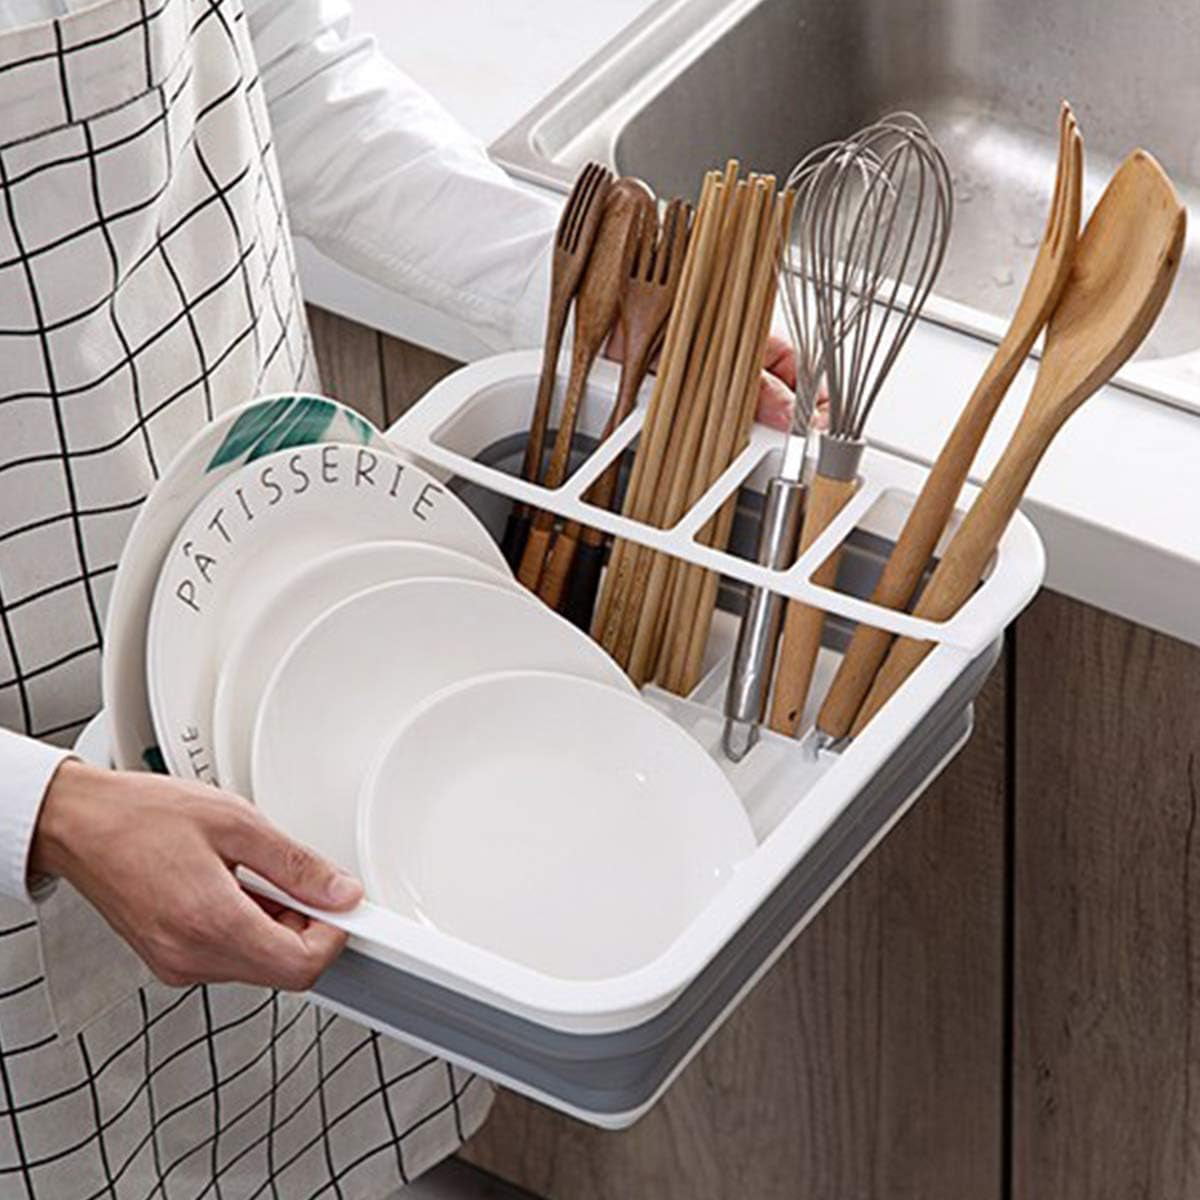 Collapsible Dish Drying Rack Portable Dinnerware Drainer Organizer for  Kitchen RV Campers Travel Trailer Space Saving Kitchen Storage Tray